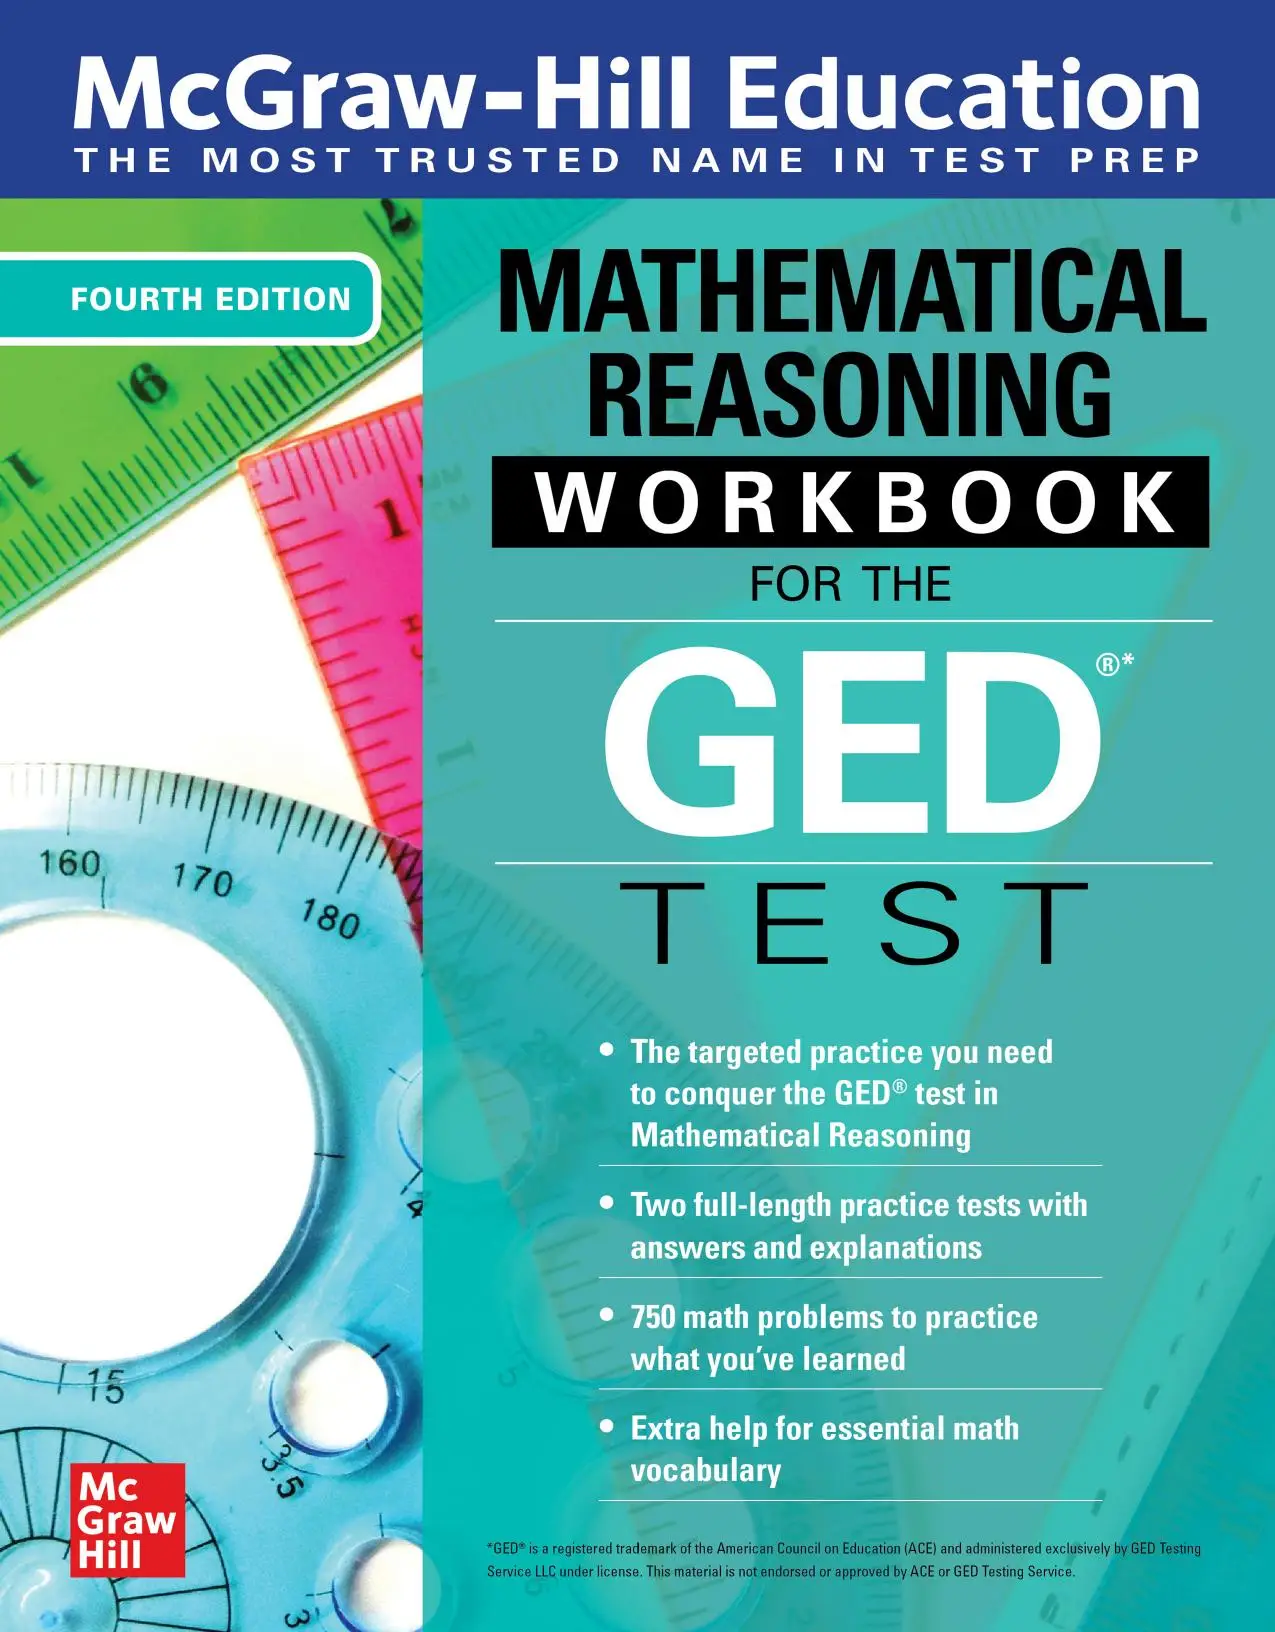 mcgraw-hill-education-mathematical-reasoning-workbook-for-the-ged-test